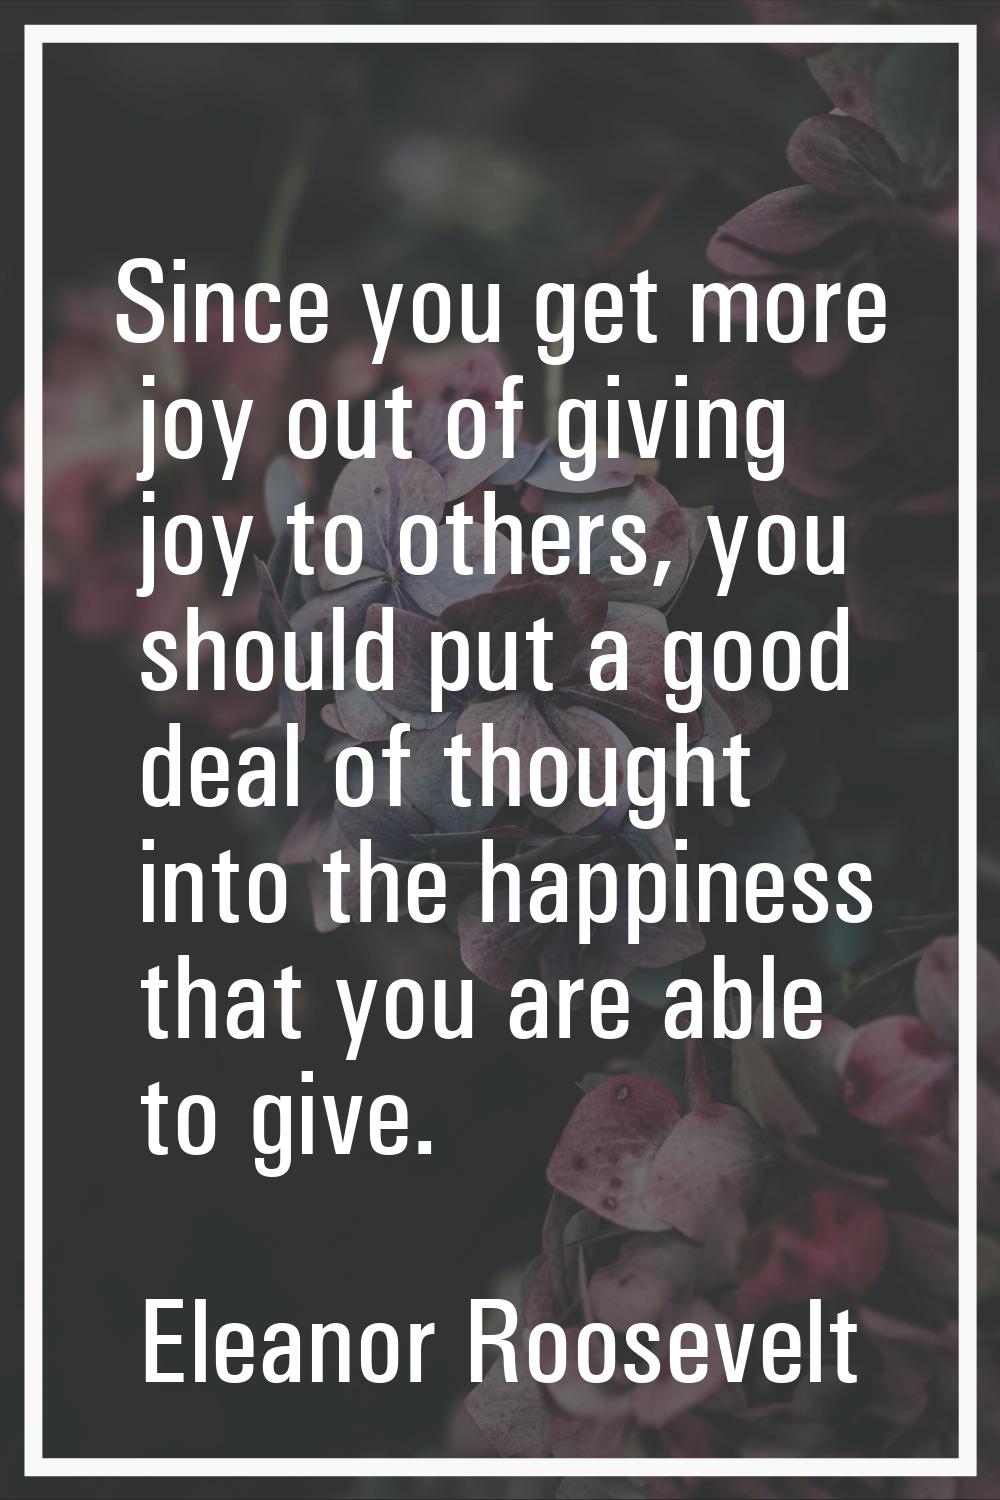 Since you get more joy out of giving joy to others, you should put a good deal of thought into the 